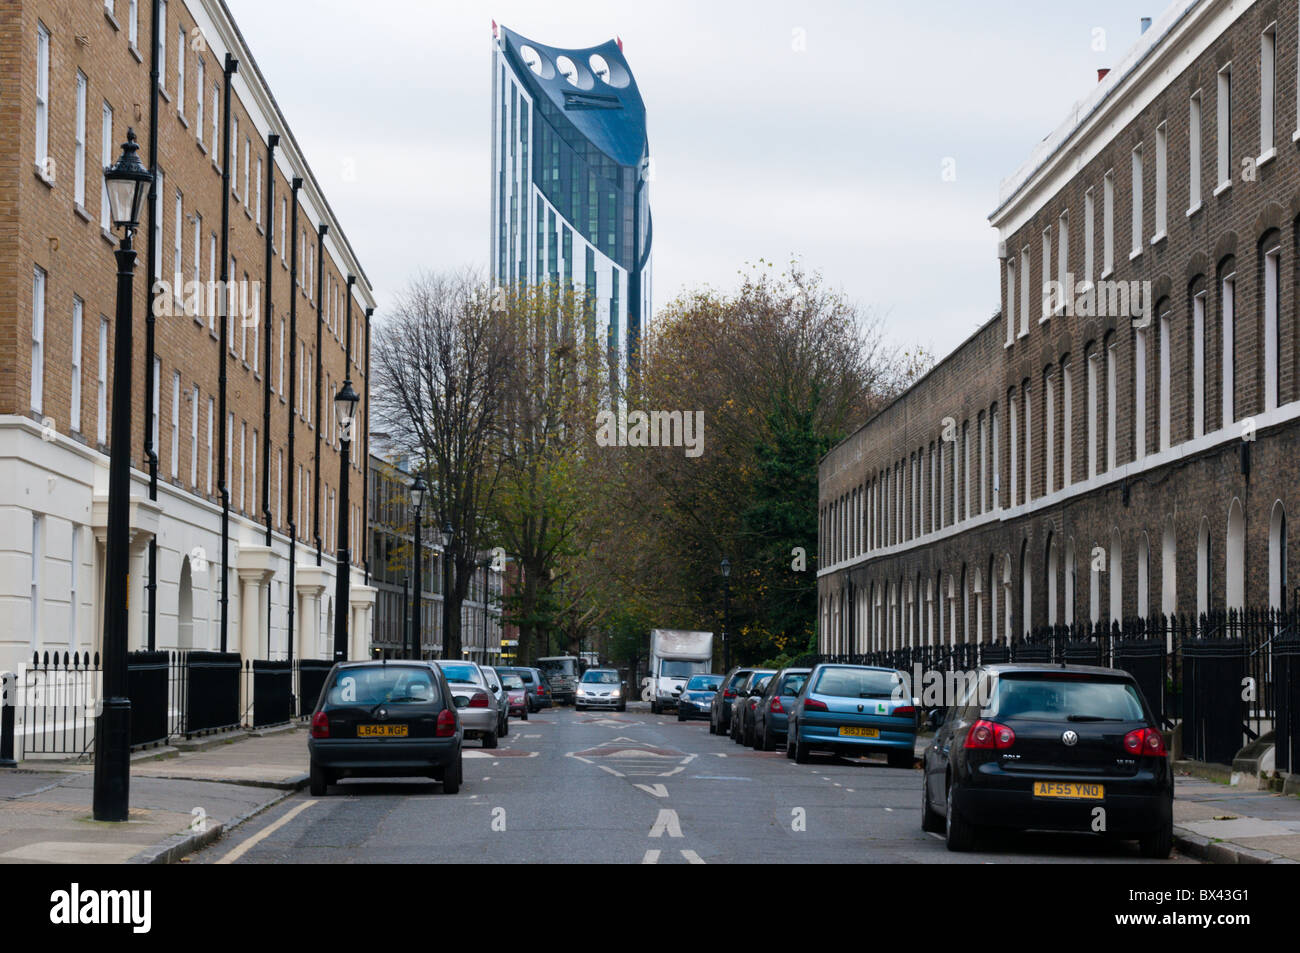 The Strata Tower at Elephant and Castle seen from Falmouth Streeet, Southwark, London Stock Photo